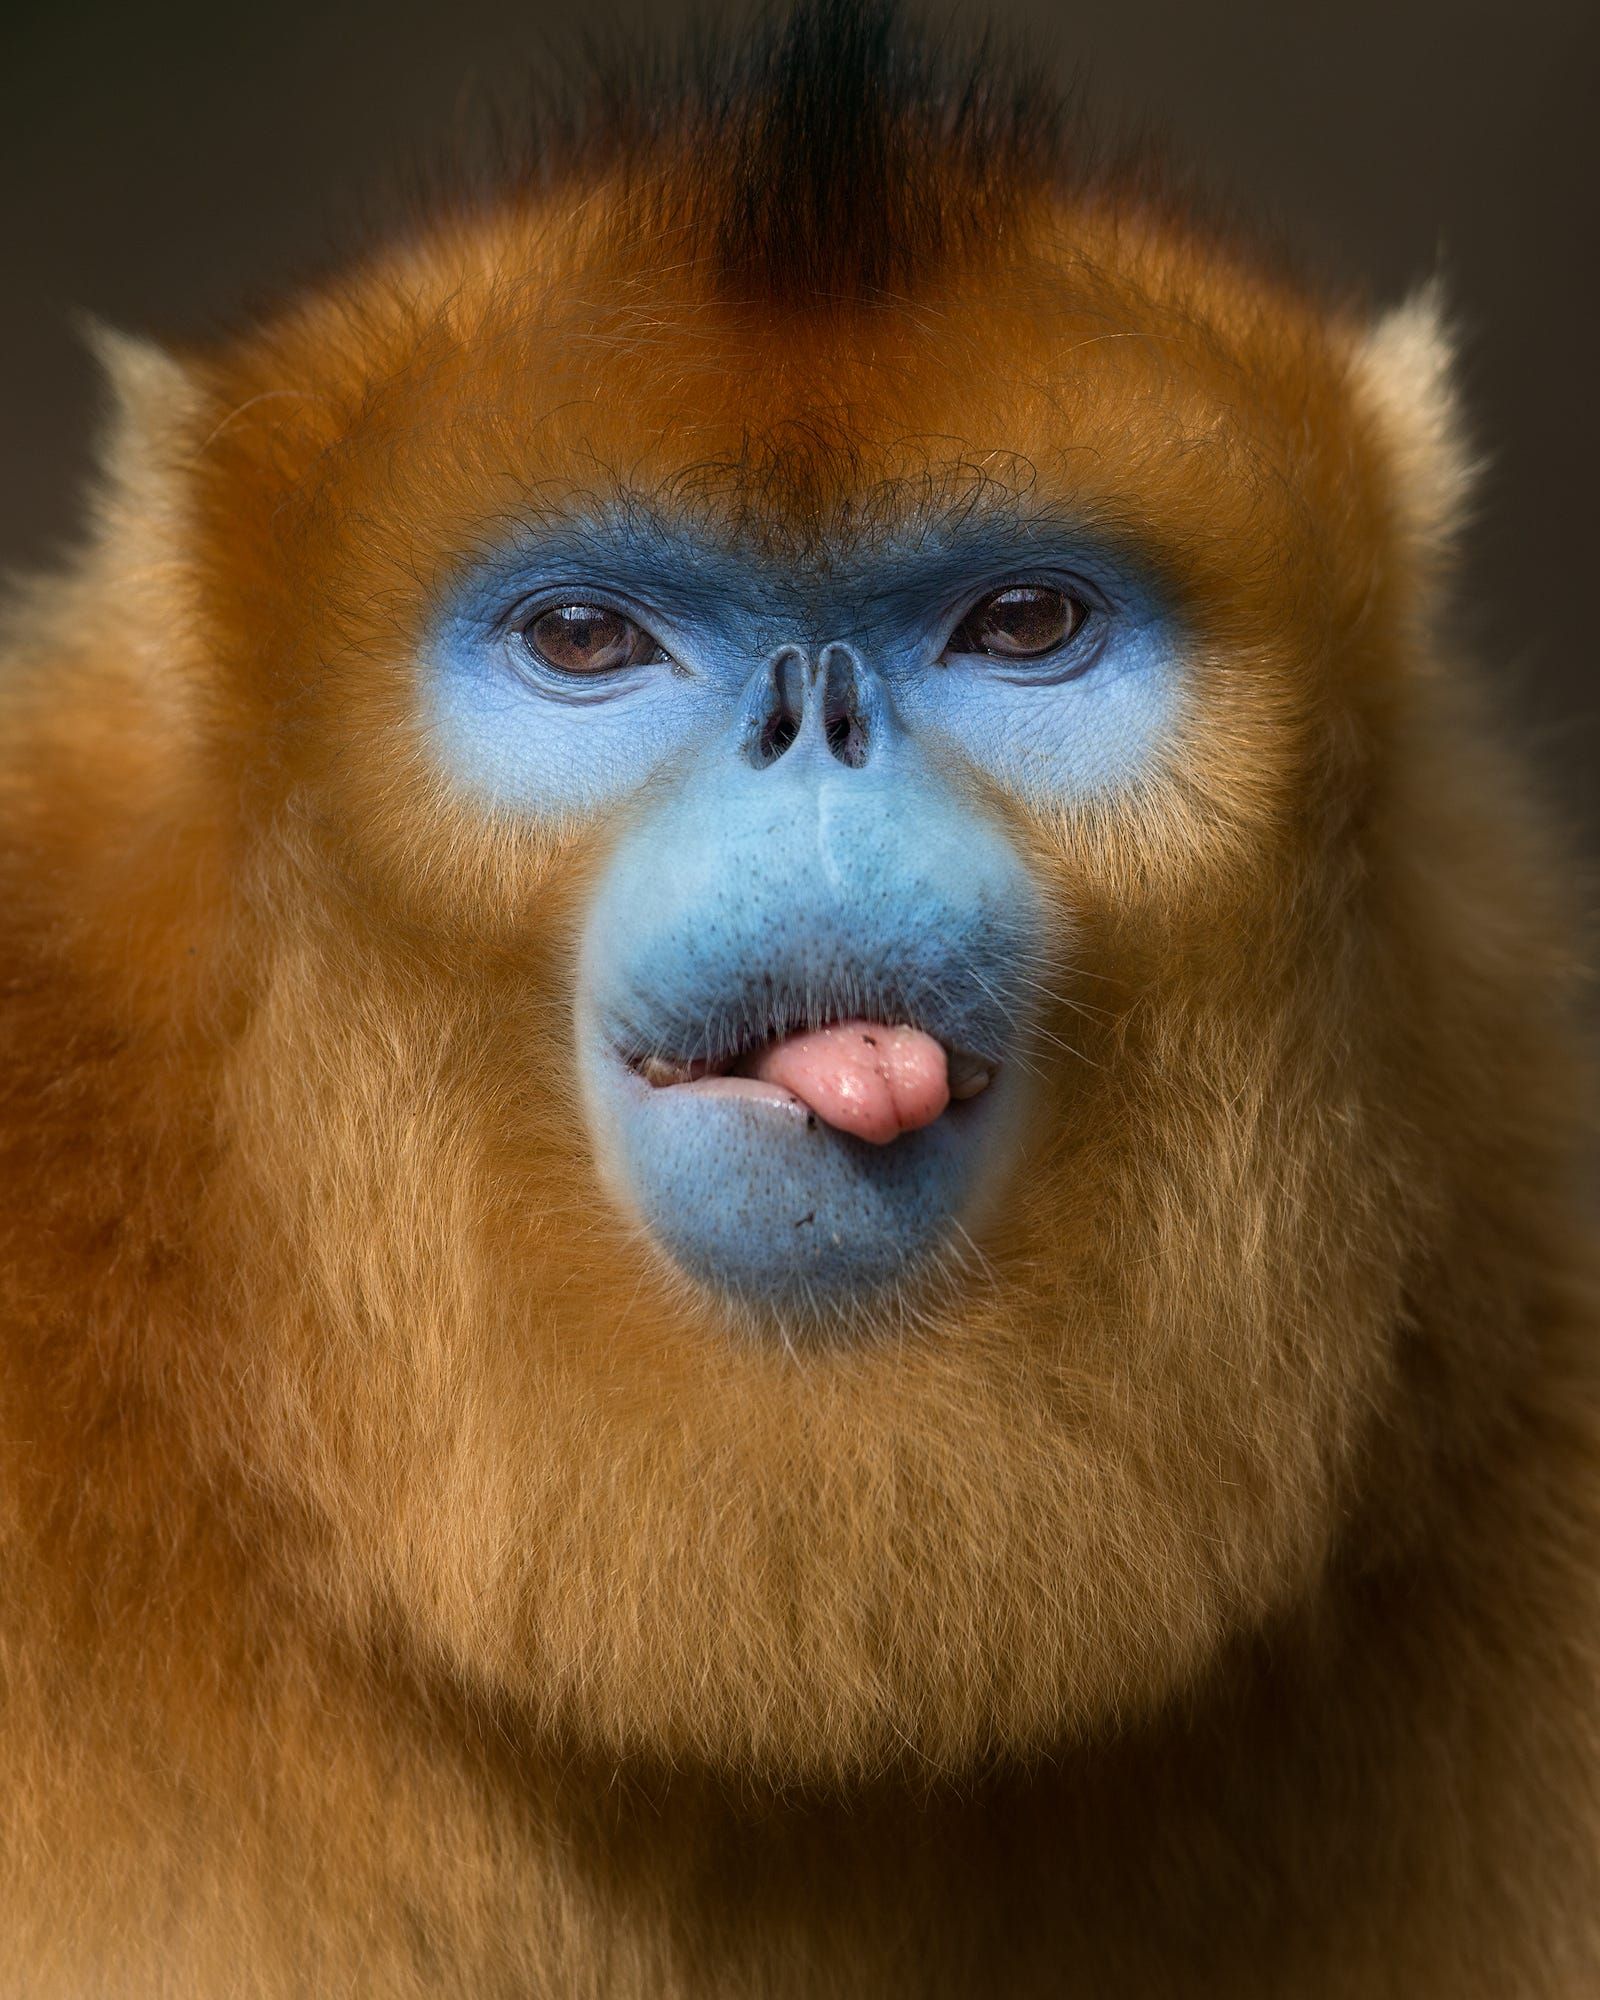 Golden snub-nosed monkey possibly fed up with that photographer ...